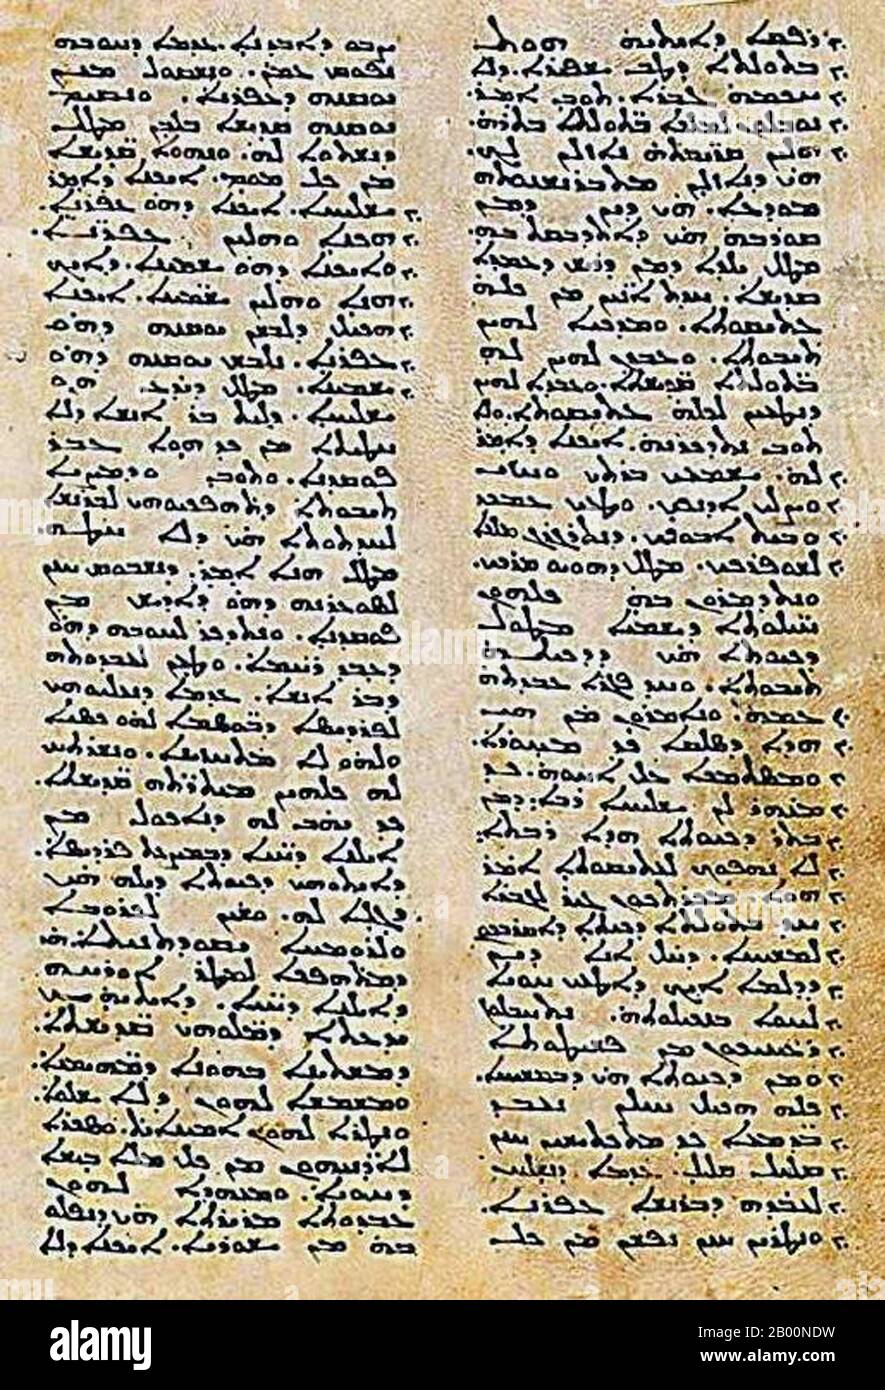 Egypt: Syriac script. Mt. Sinai, Egypt, 9th c. MS in Syriac on vellum, from the Monastery of St Catherine, Mt Sinai.  Syriac (ܠܫܢܐ ܣܘܪܝܝܐ Leššānā Suryāyā) is a dialect of Middle Aramaic that was once spoken across much of the Fertile Crescent and Eastern Arabia.  Having first appeared as a script in the 1st century CE after being spoken as an unwritten language for five centuries, Classical Syriac became a major literary language throughout the Middle East from the 4th to the 8th centuries, the classical language of Edessa, preserved in a large body of Syriac literature. Stock Photo